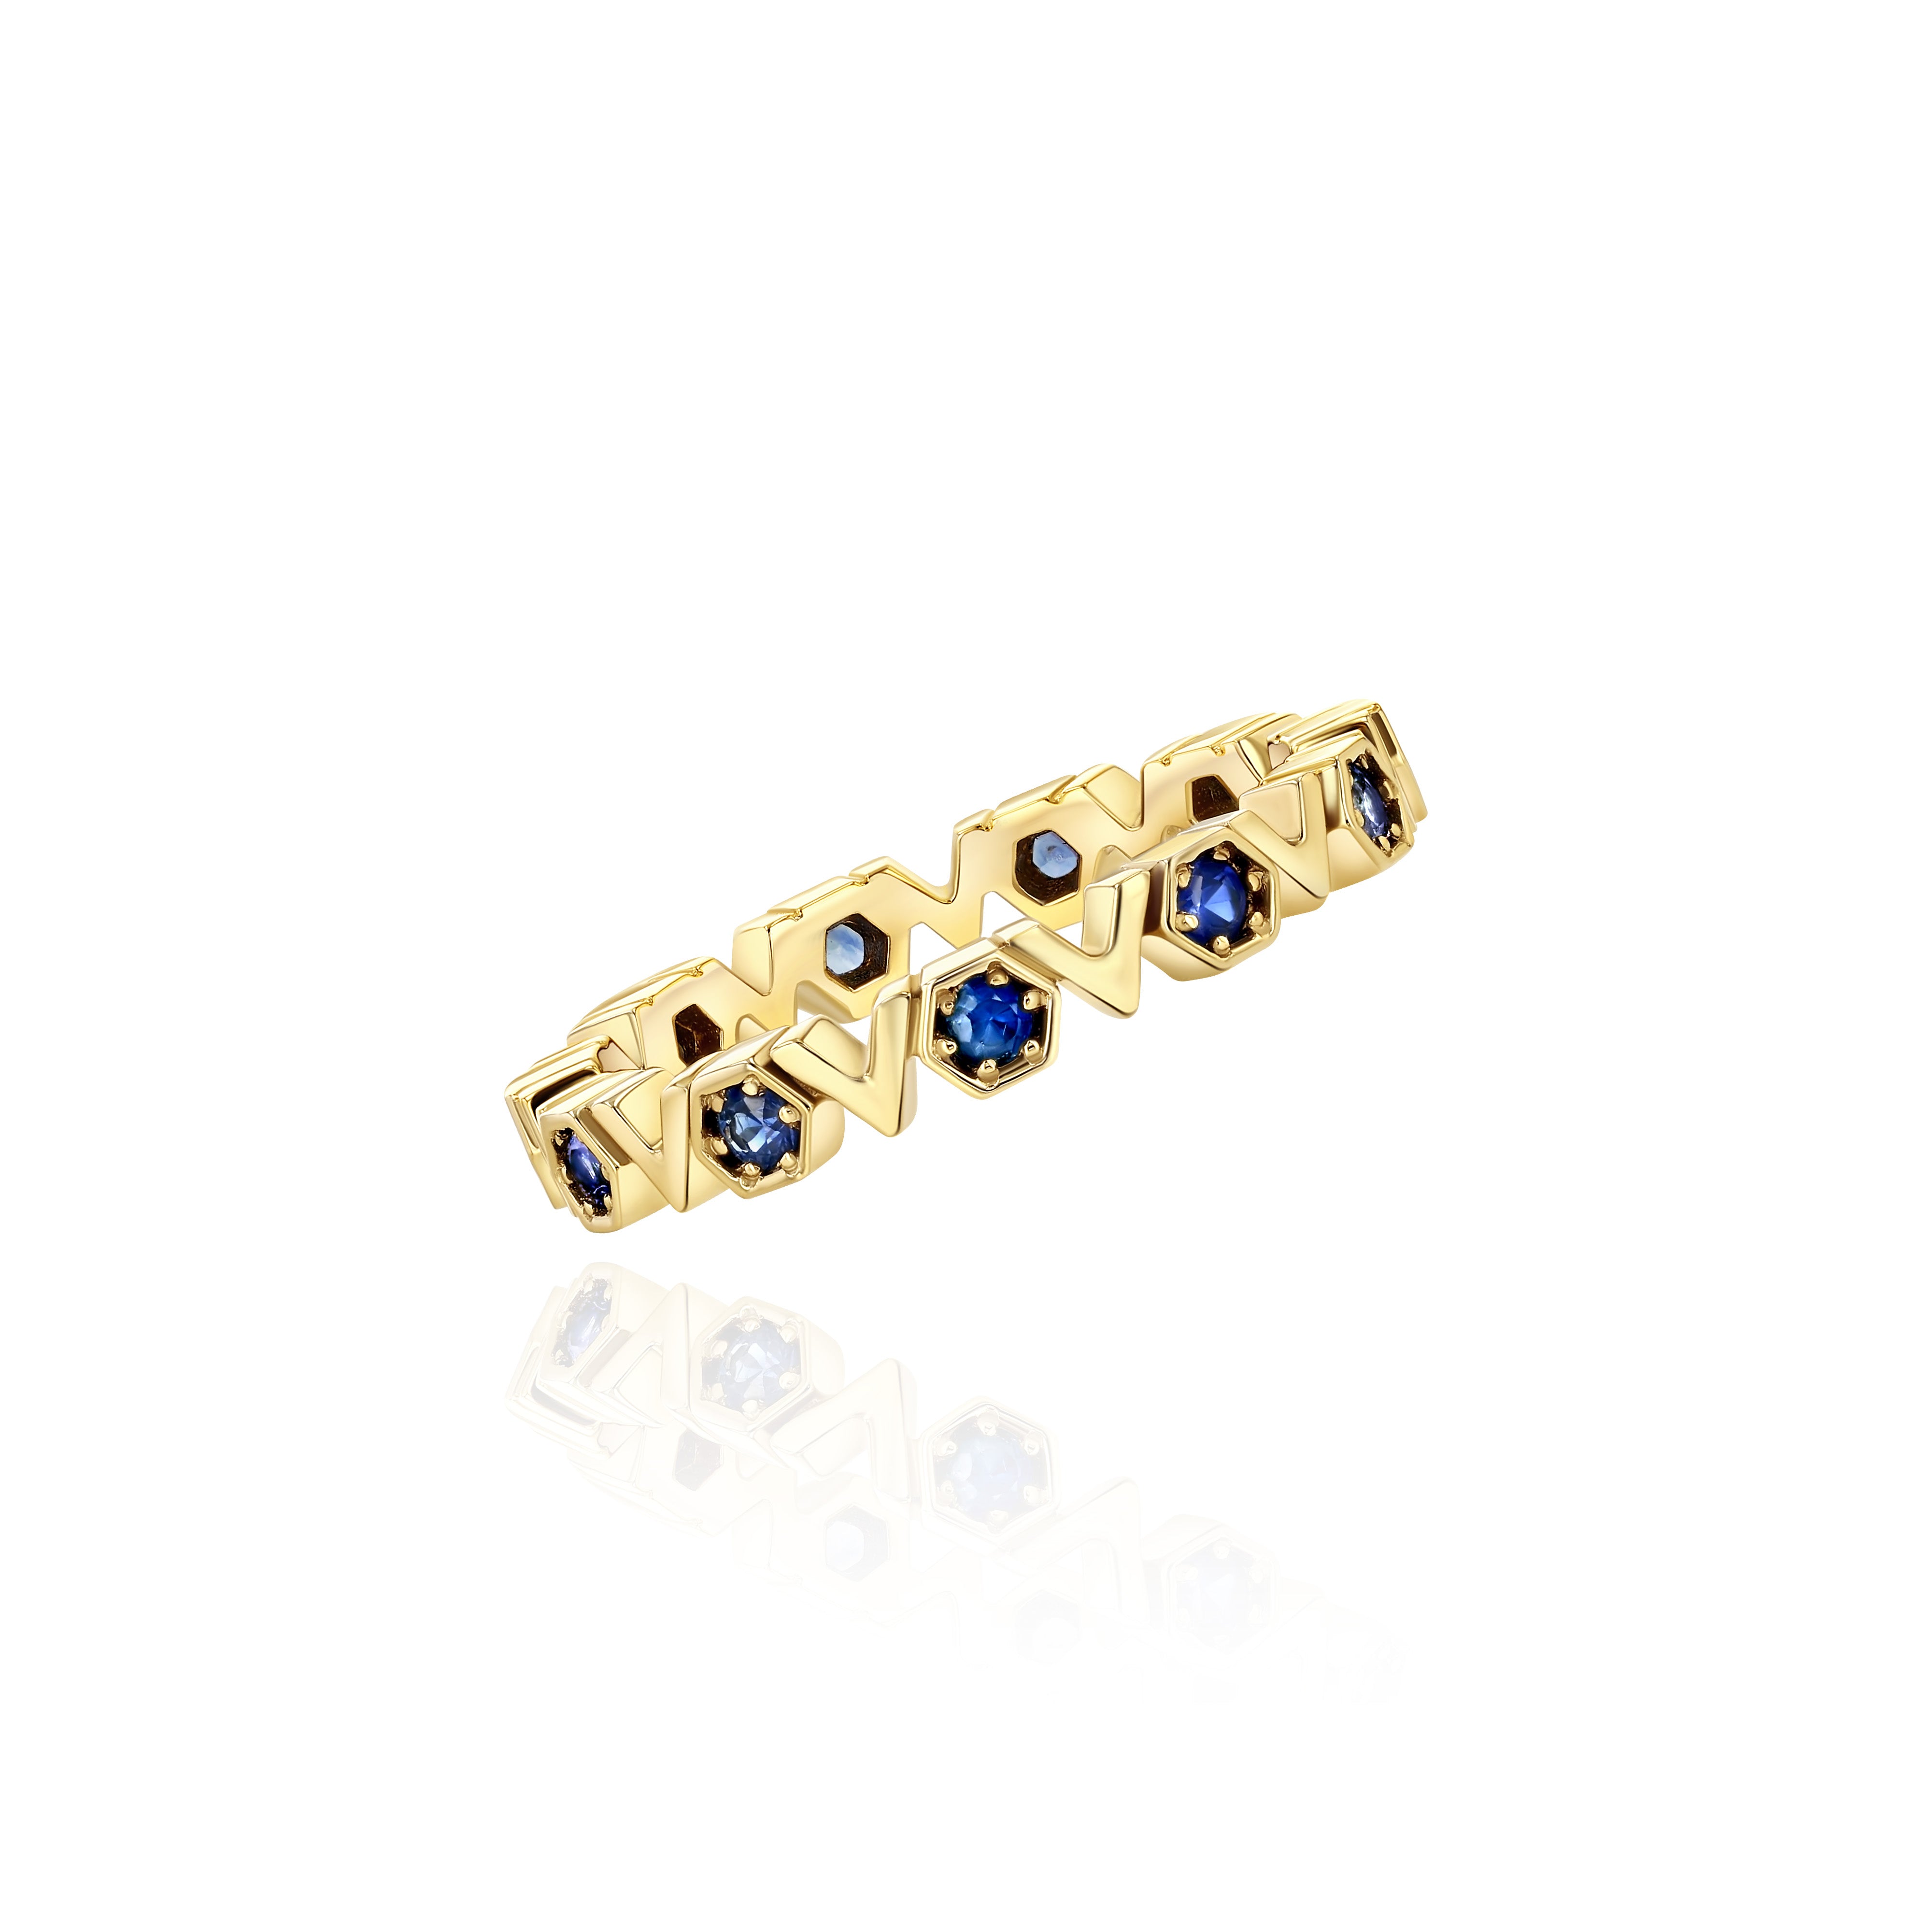 Yellow Gold Band with repeating Blue Sapphire hexagons and V shapes, Medium